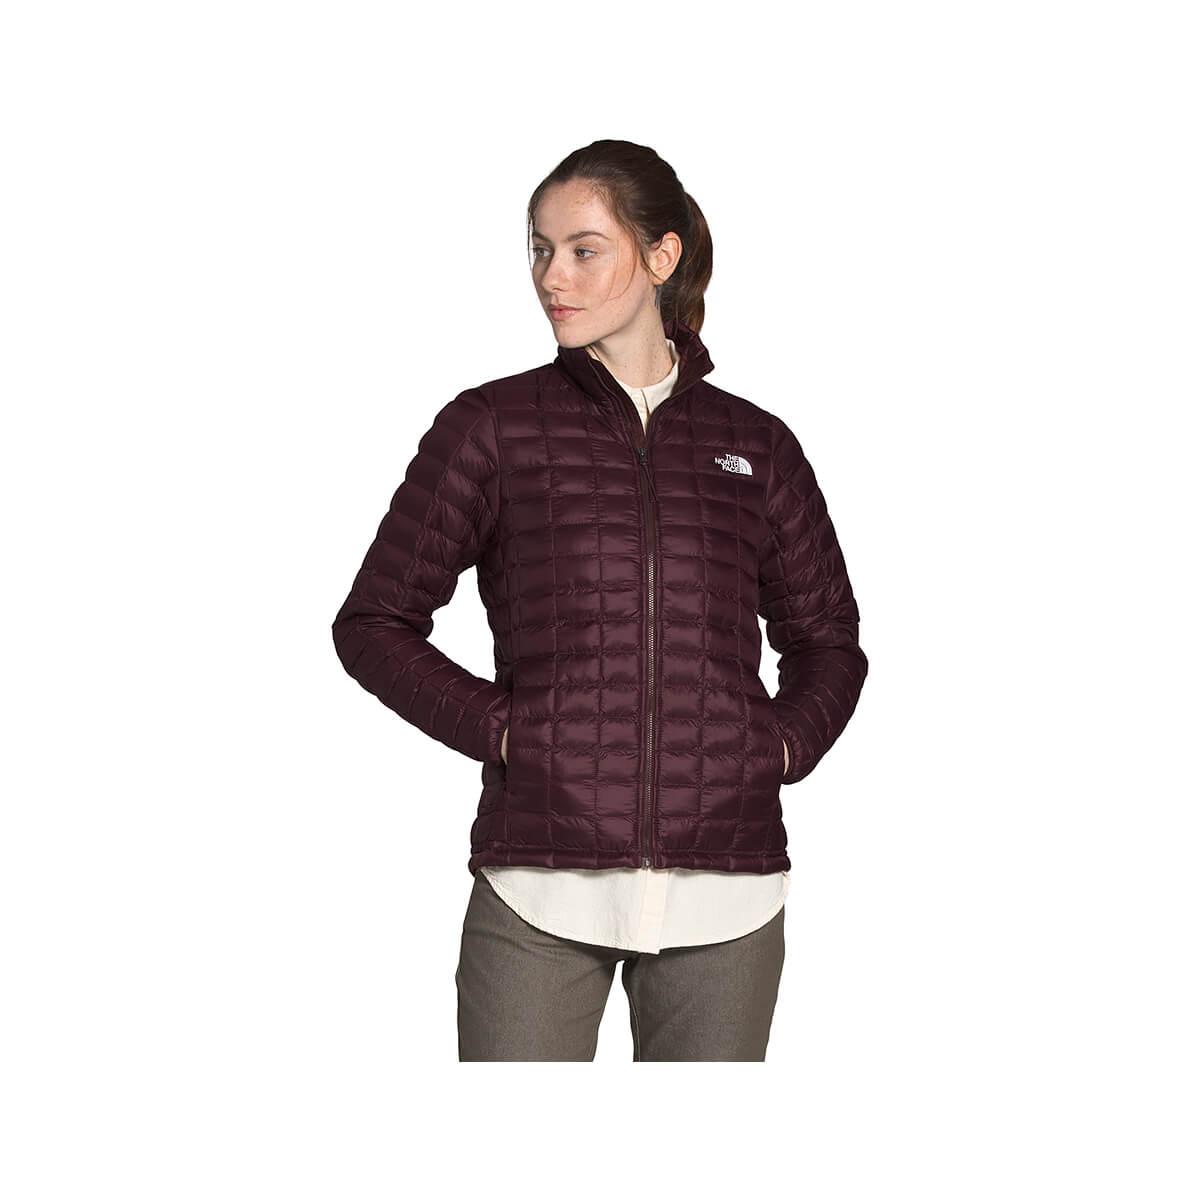 Mast General Store | Women's Thermoball Eco Jacket